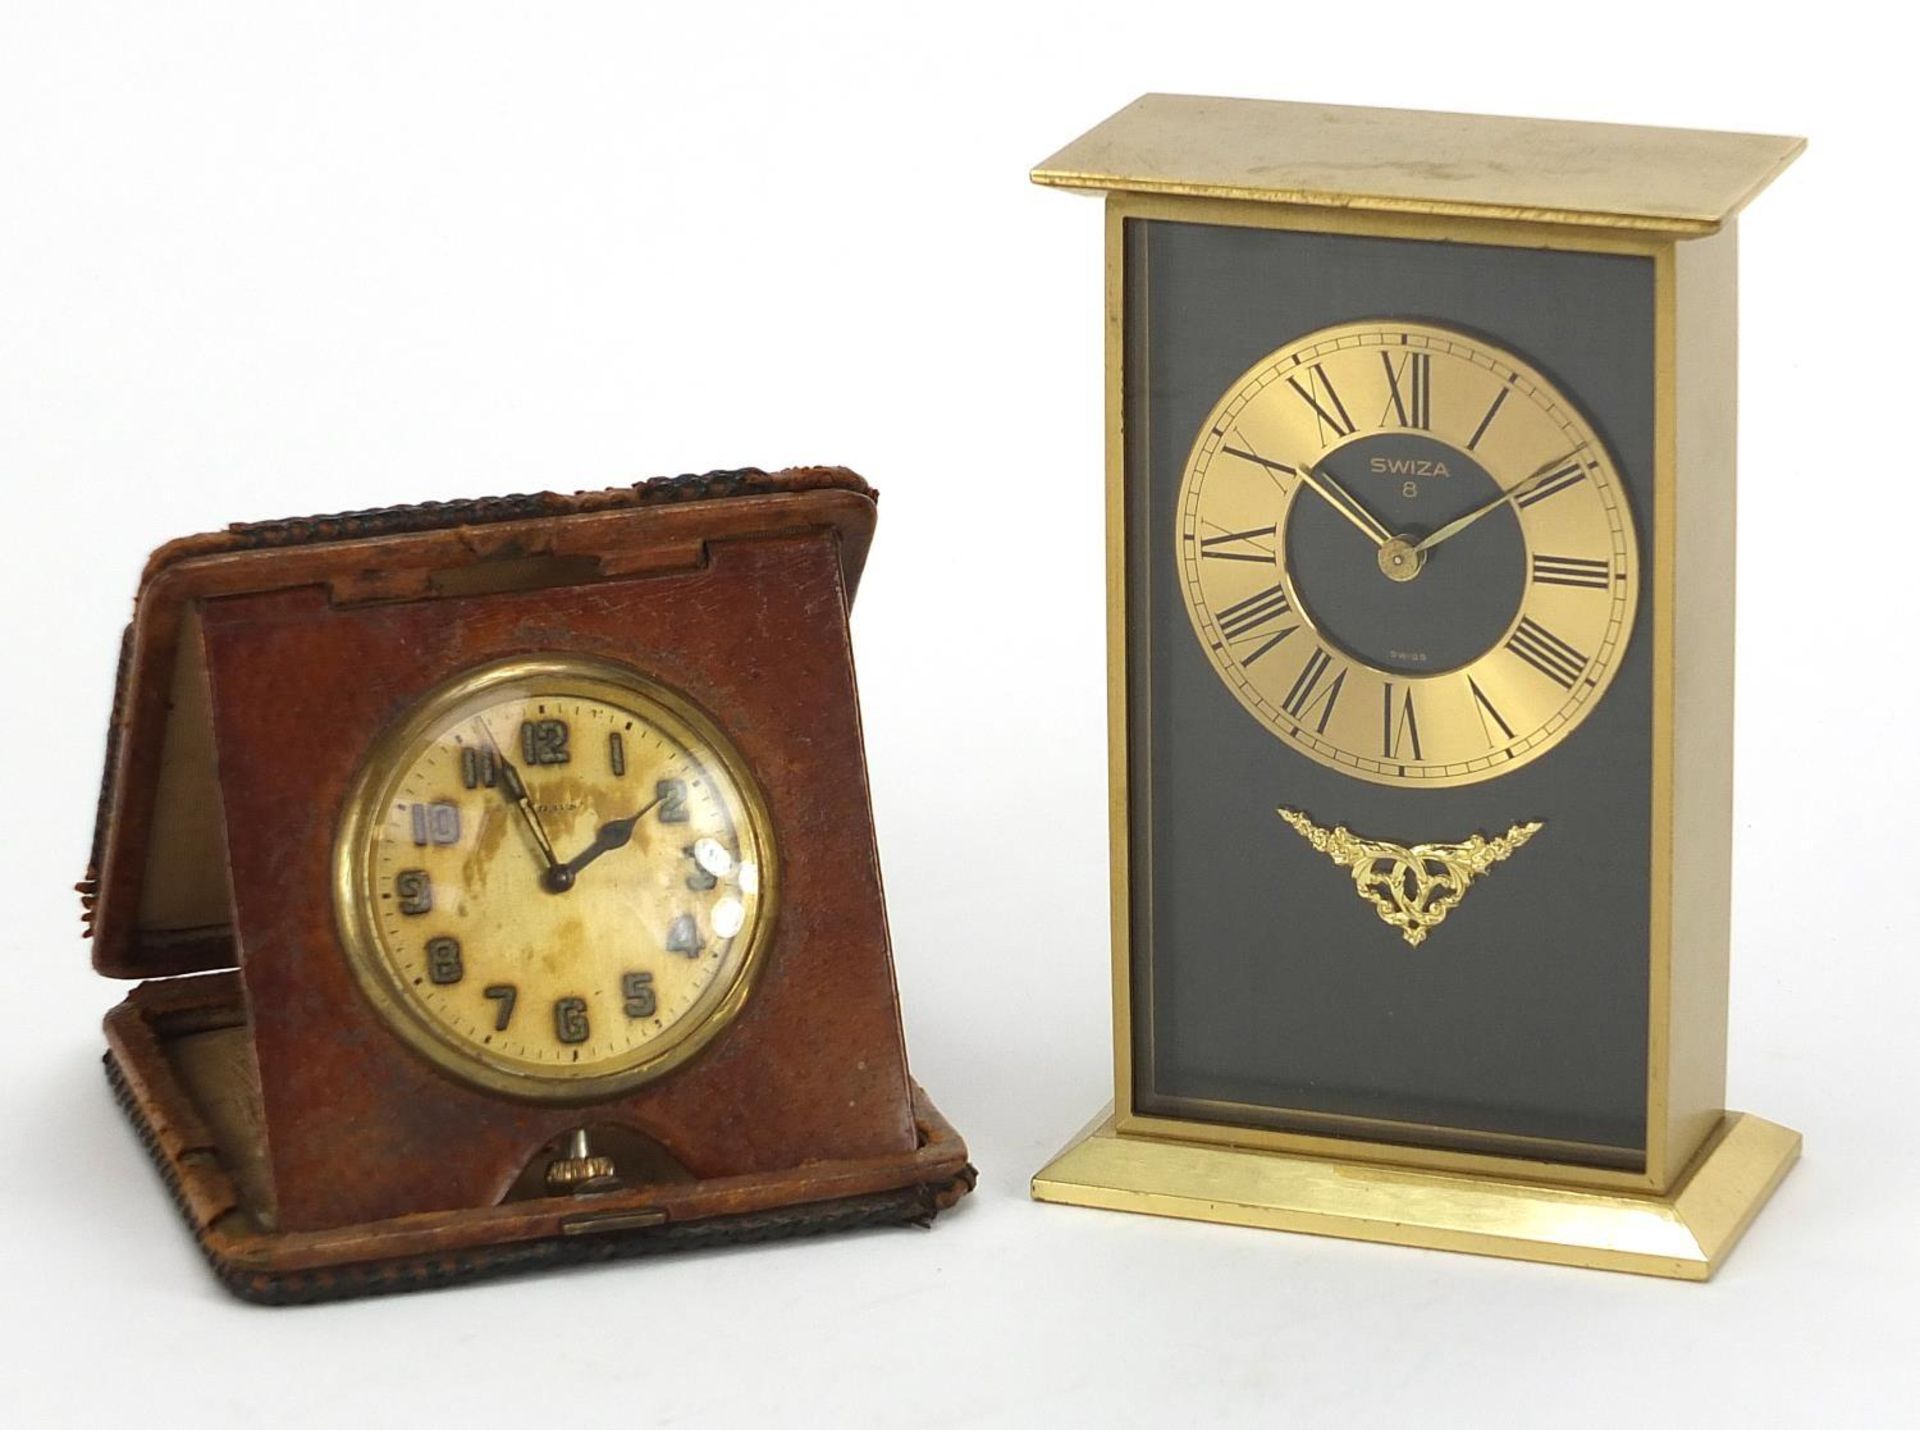 Swiza eight day desk clock and a leather cased travel clock, the largest 14.5cm high :